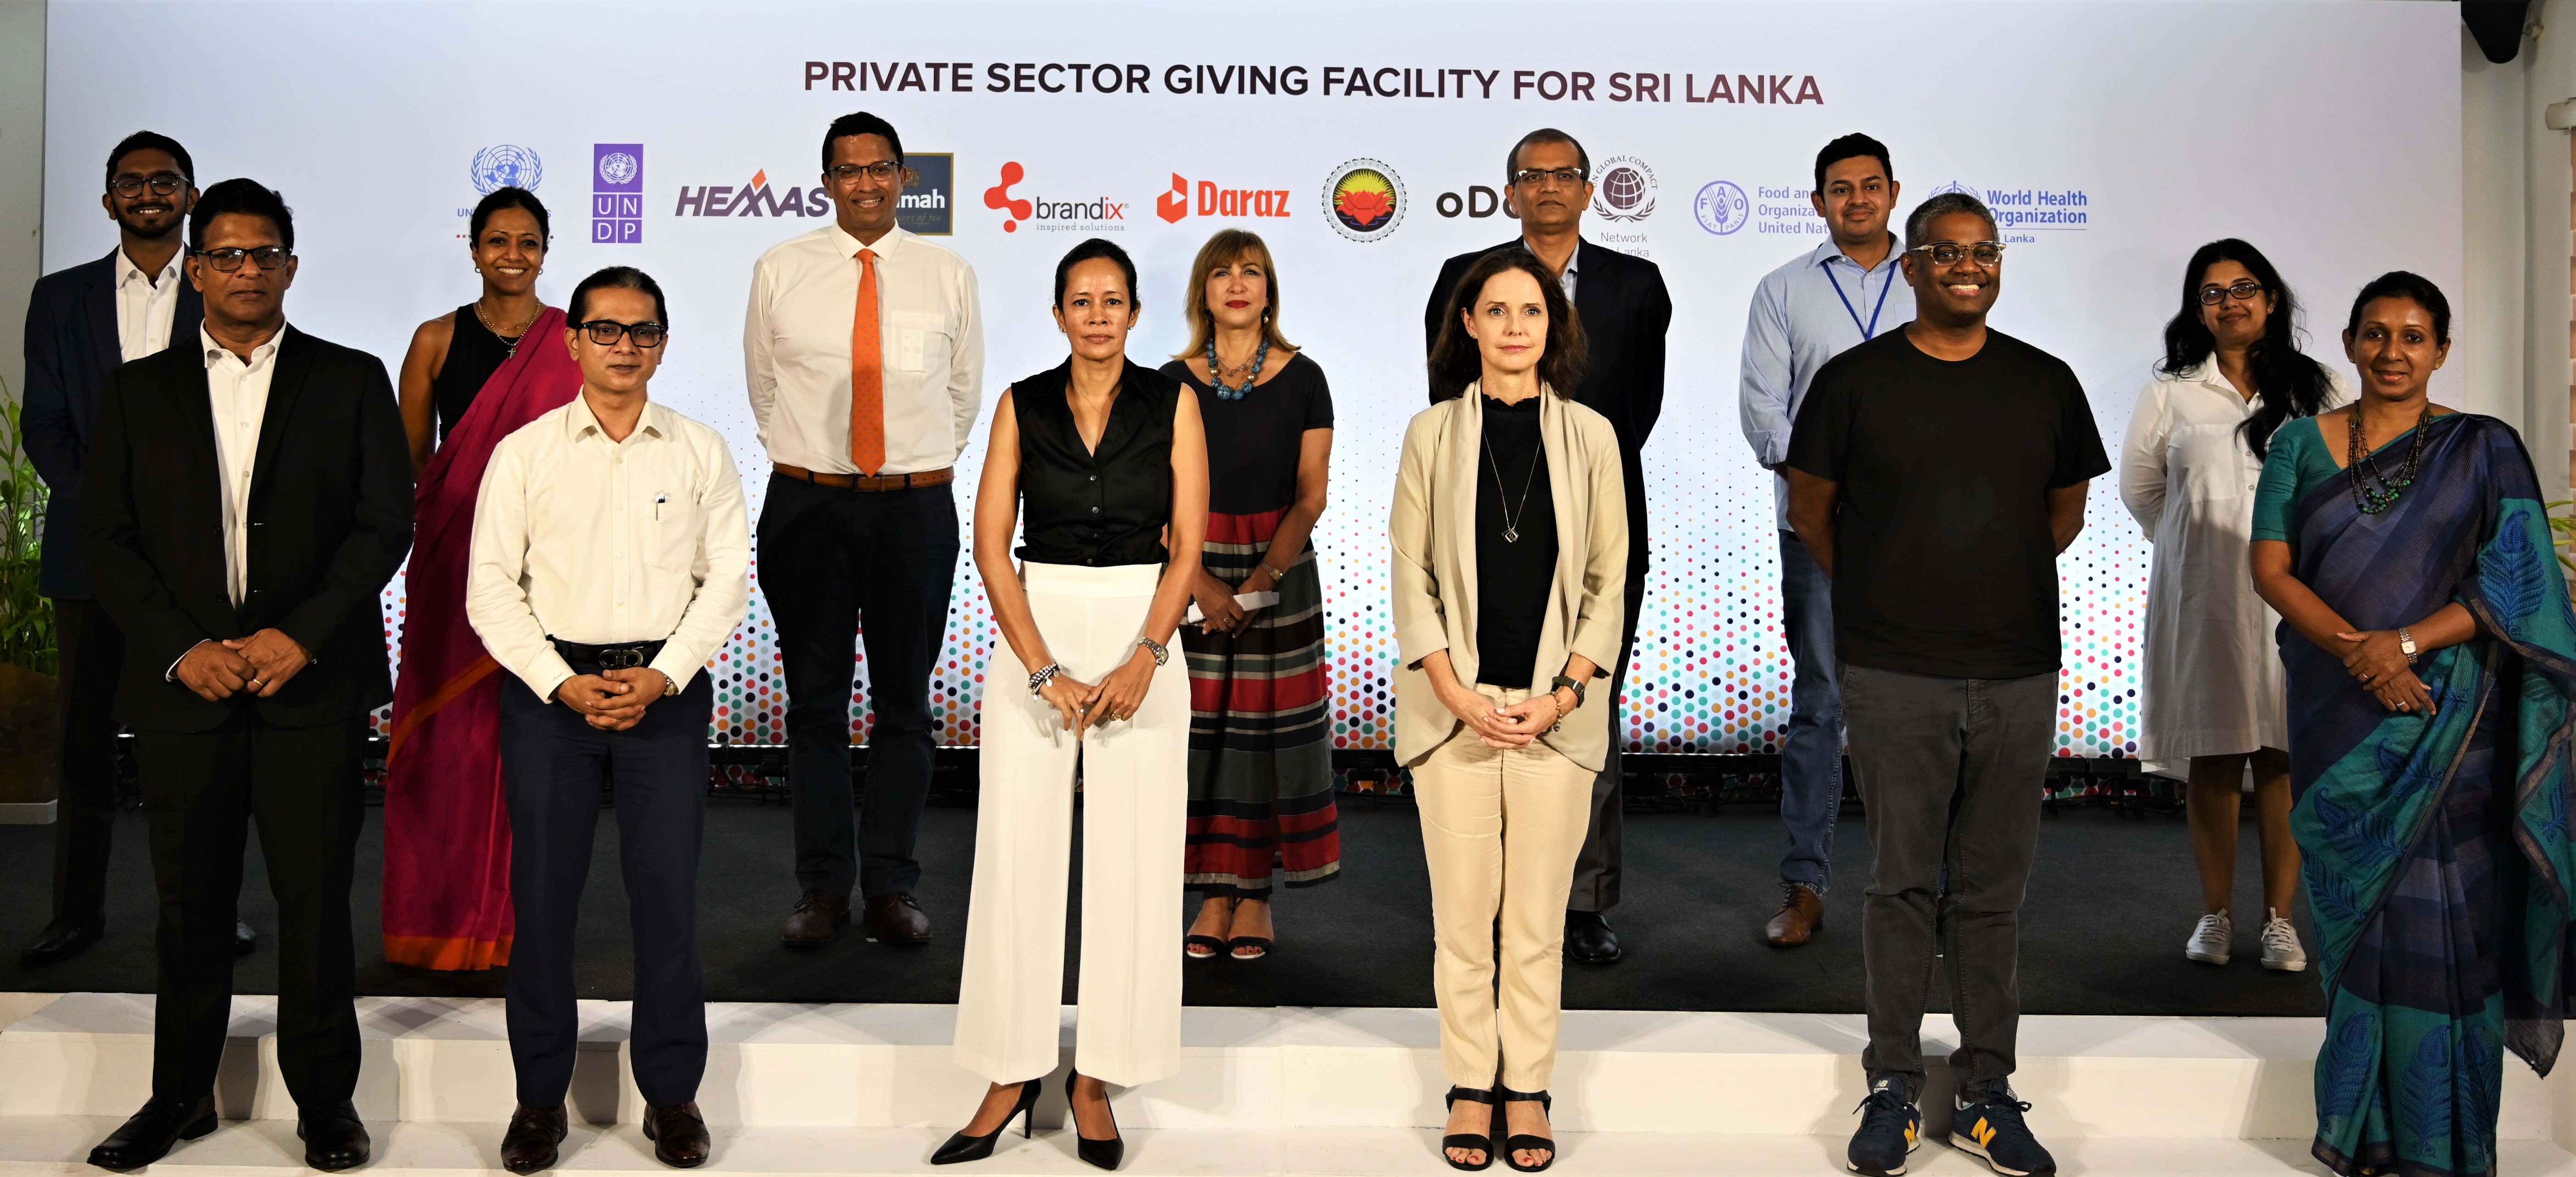 Partners of the Private Sector Giving Facility standing together